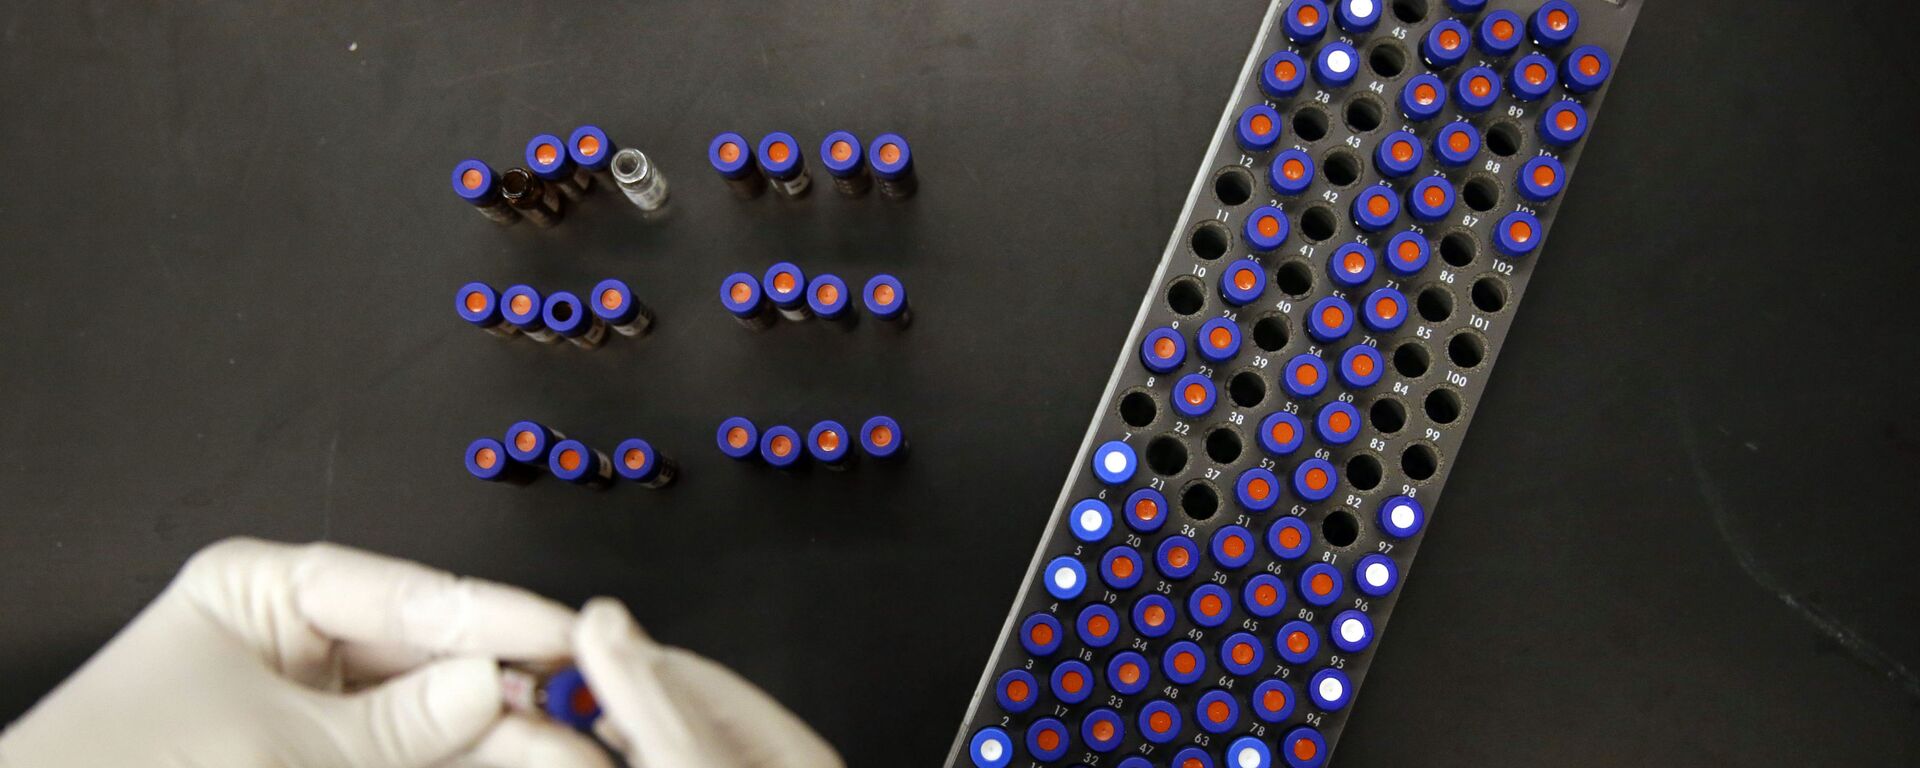 In this Aug. 10, 2015, photo, Christine Jelinek, a postdoctoral fellow at Johns Hopkins University, works alongside a tray of vials containing cerebral spinal fluid in Baltimore. Dr. Akhilesh Pandey, a researcher at Johns Hopkins University, said his research analyzes both adult and fetal tissue, and by identifying which proteins are present, he can get clues that could be used to help detect cancer in adults earlier. - Sputnik International, 1920, 23.05.2022